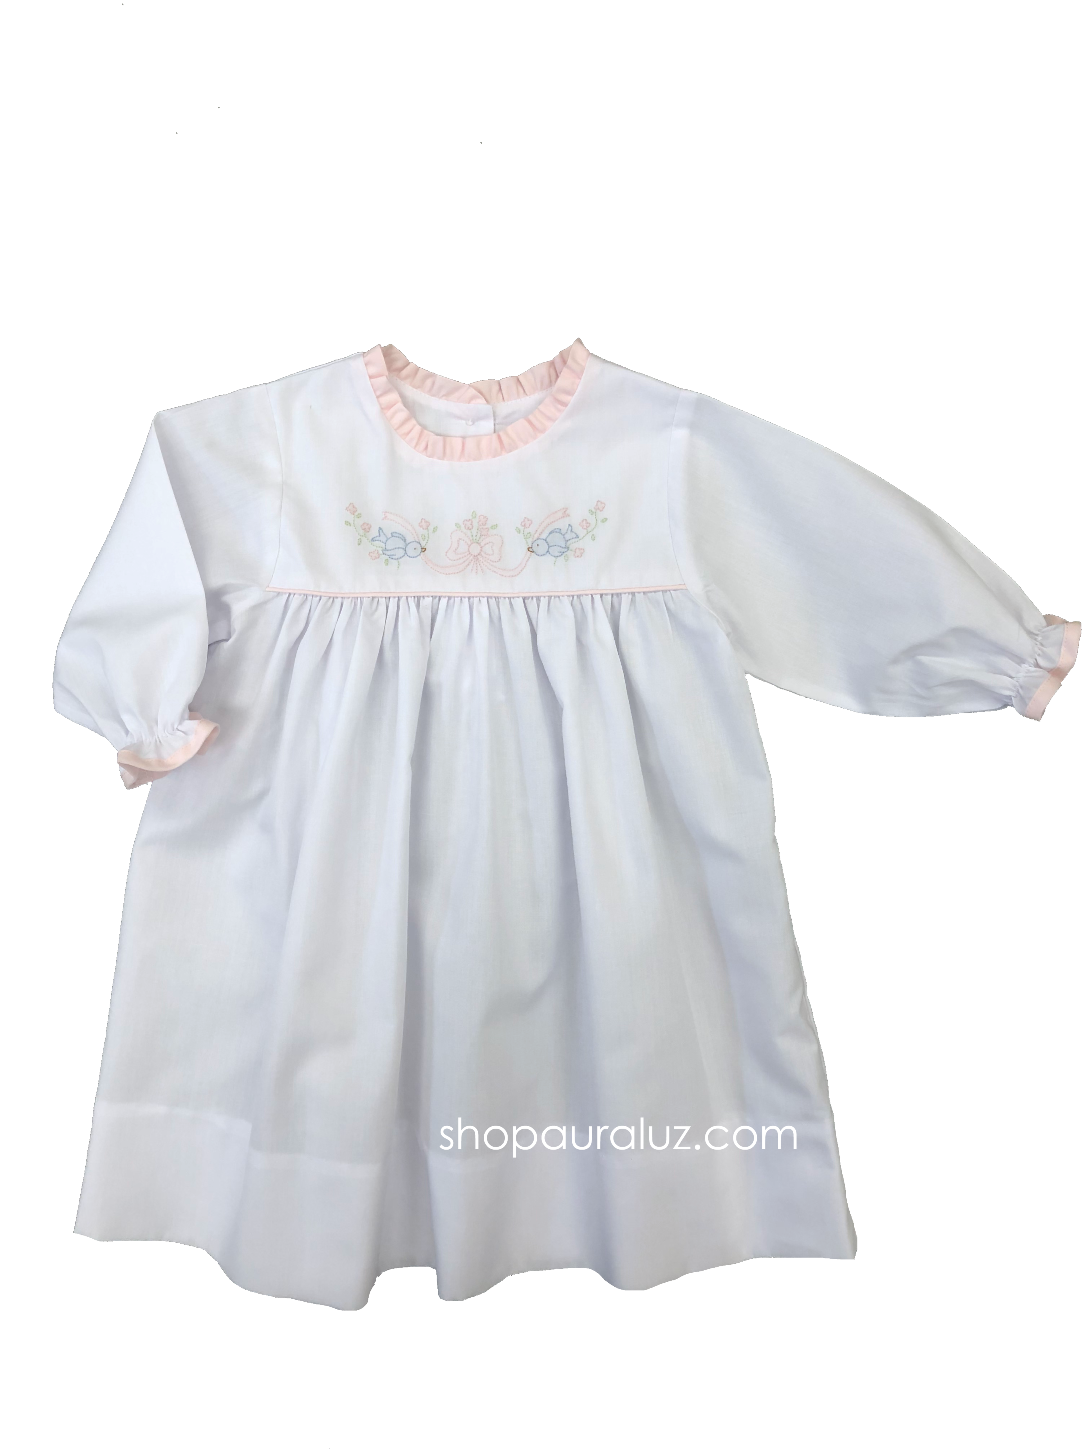 Auraluz Girl Dress, l/s...White with pink ruffle trim embroidered doves with ribbon